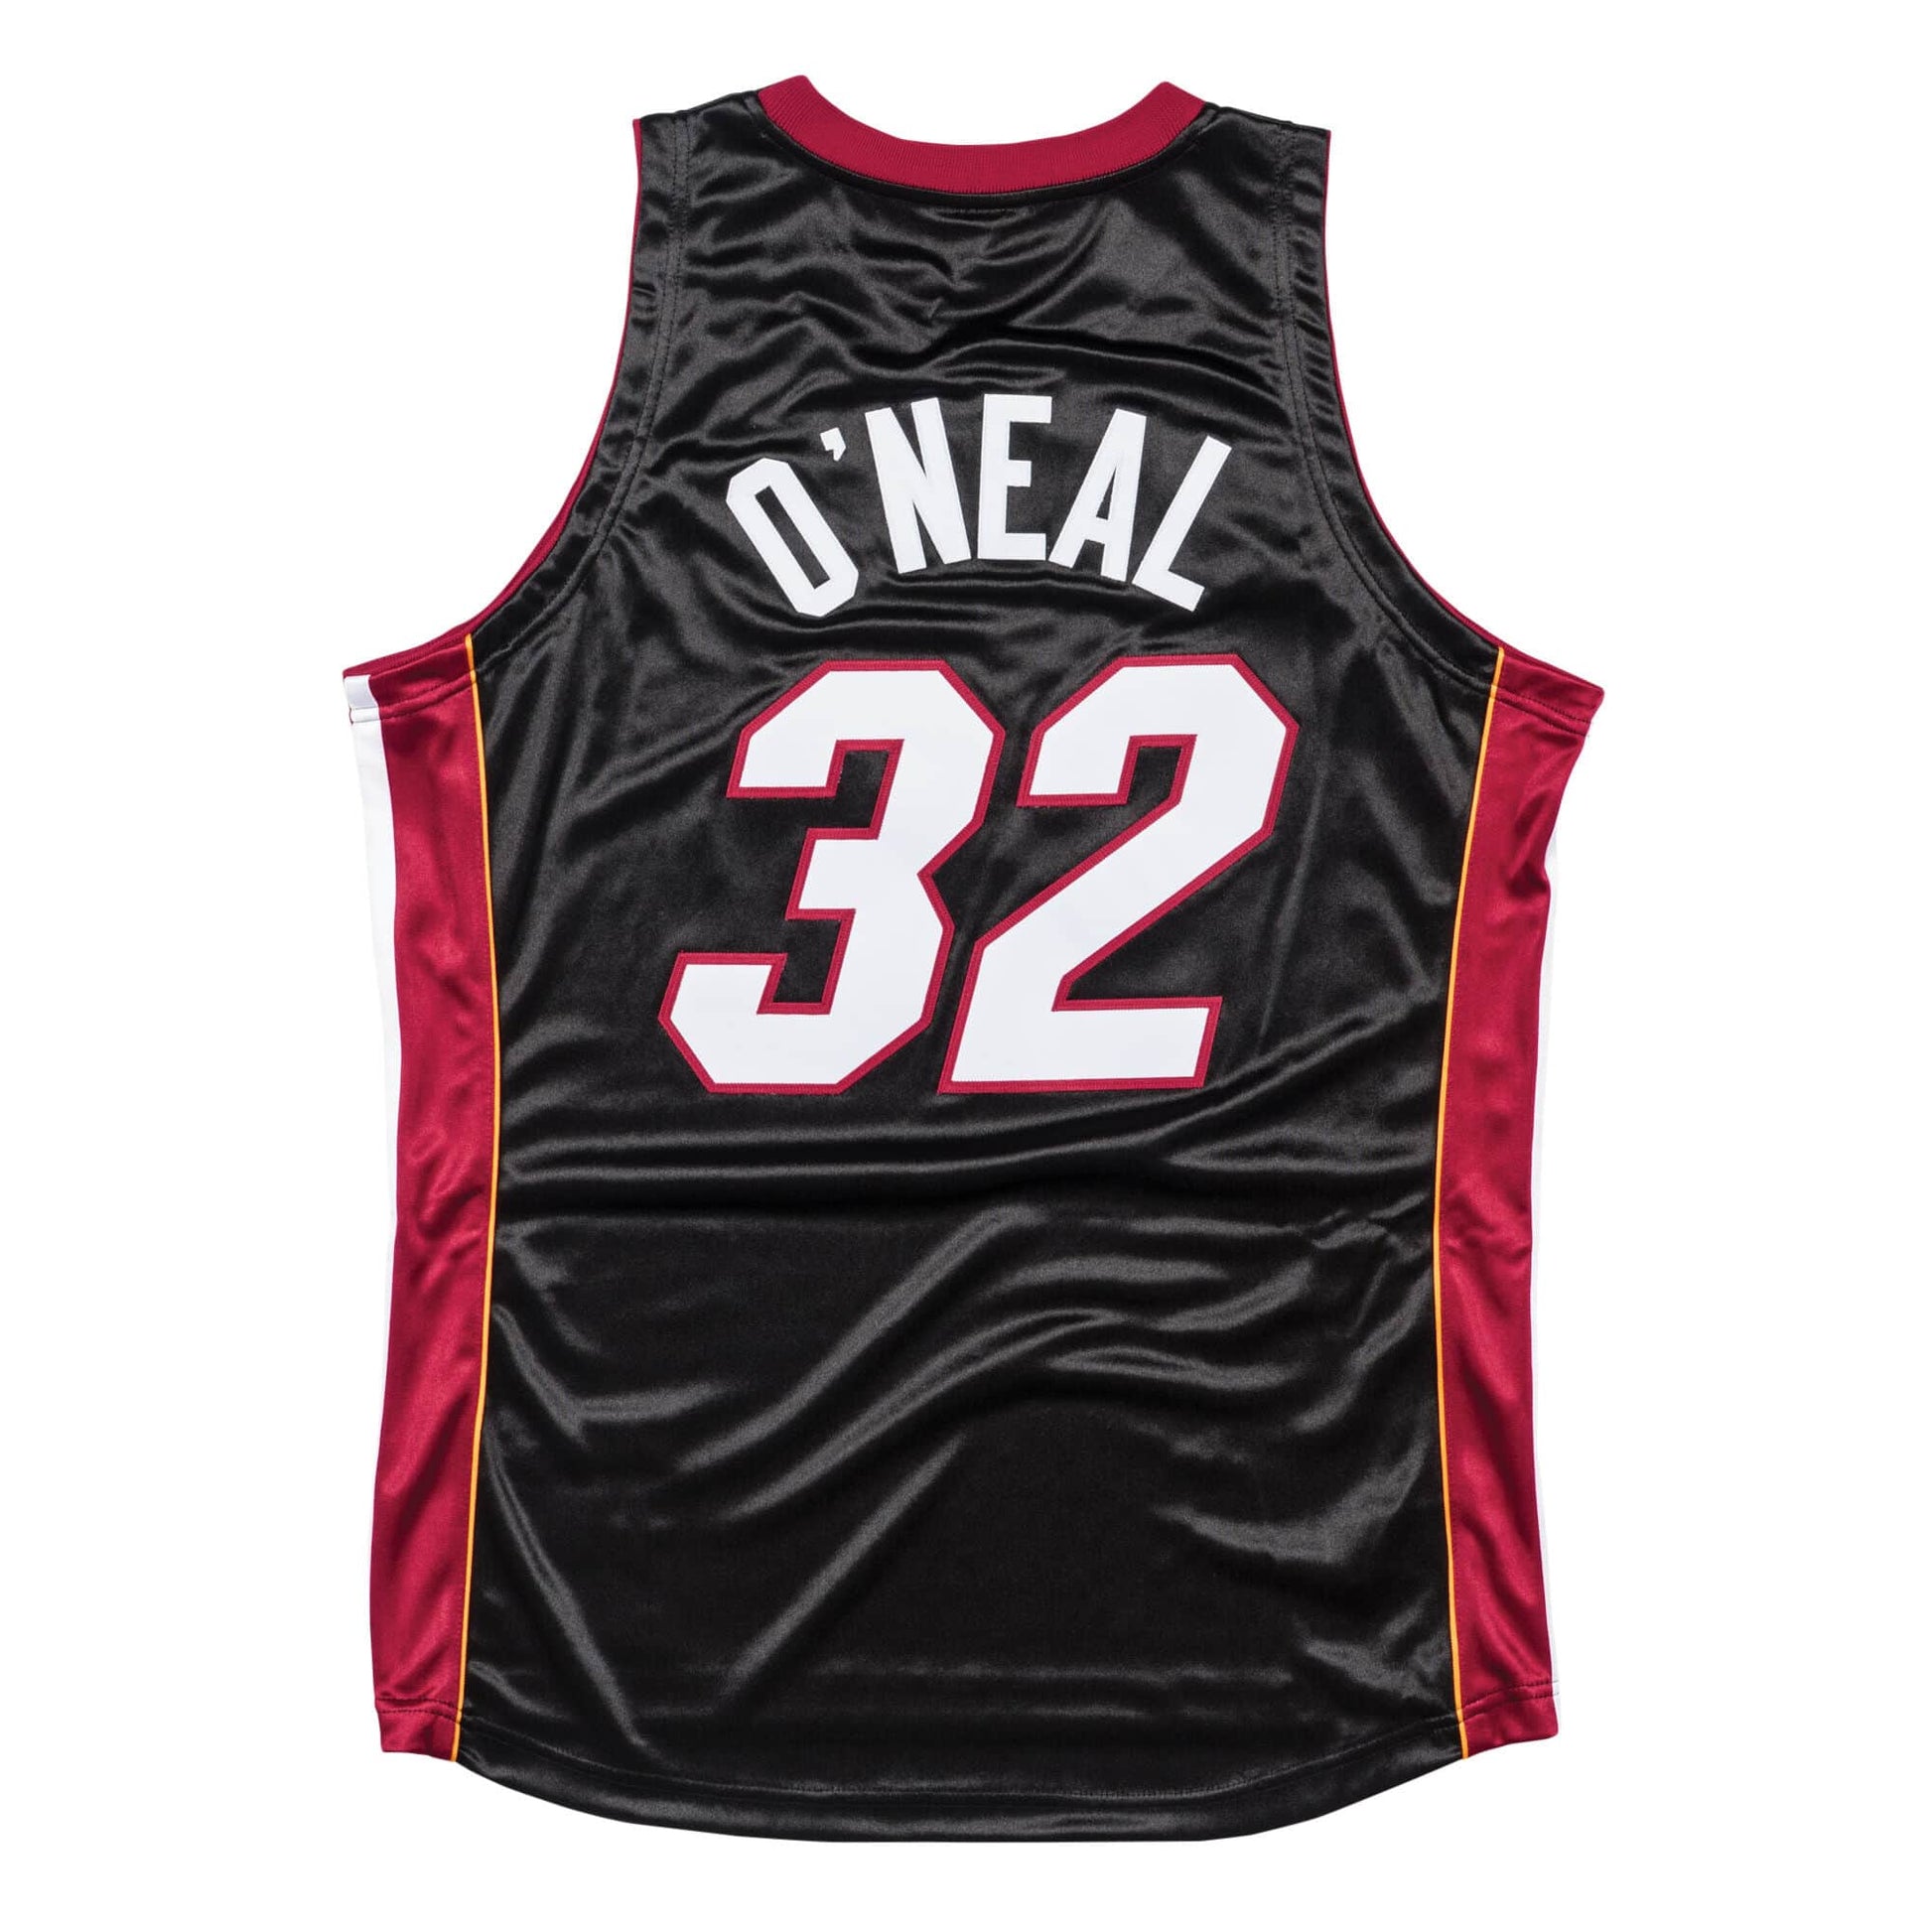 Dwayne Wade Miami Heat 05-06 Road Authentic Jersey